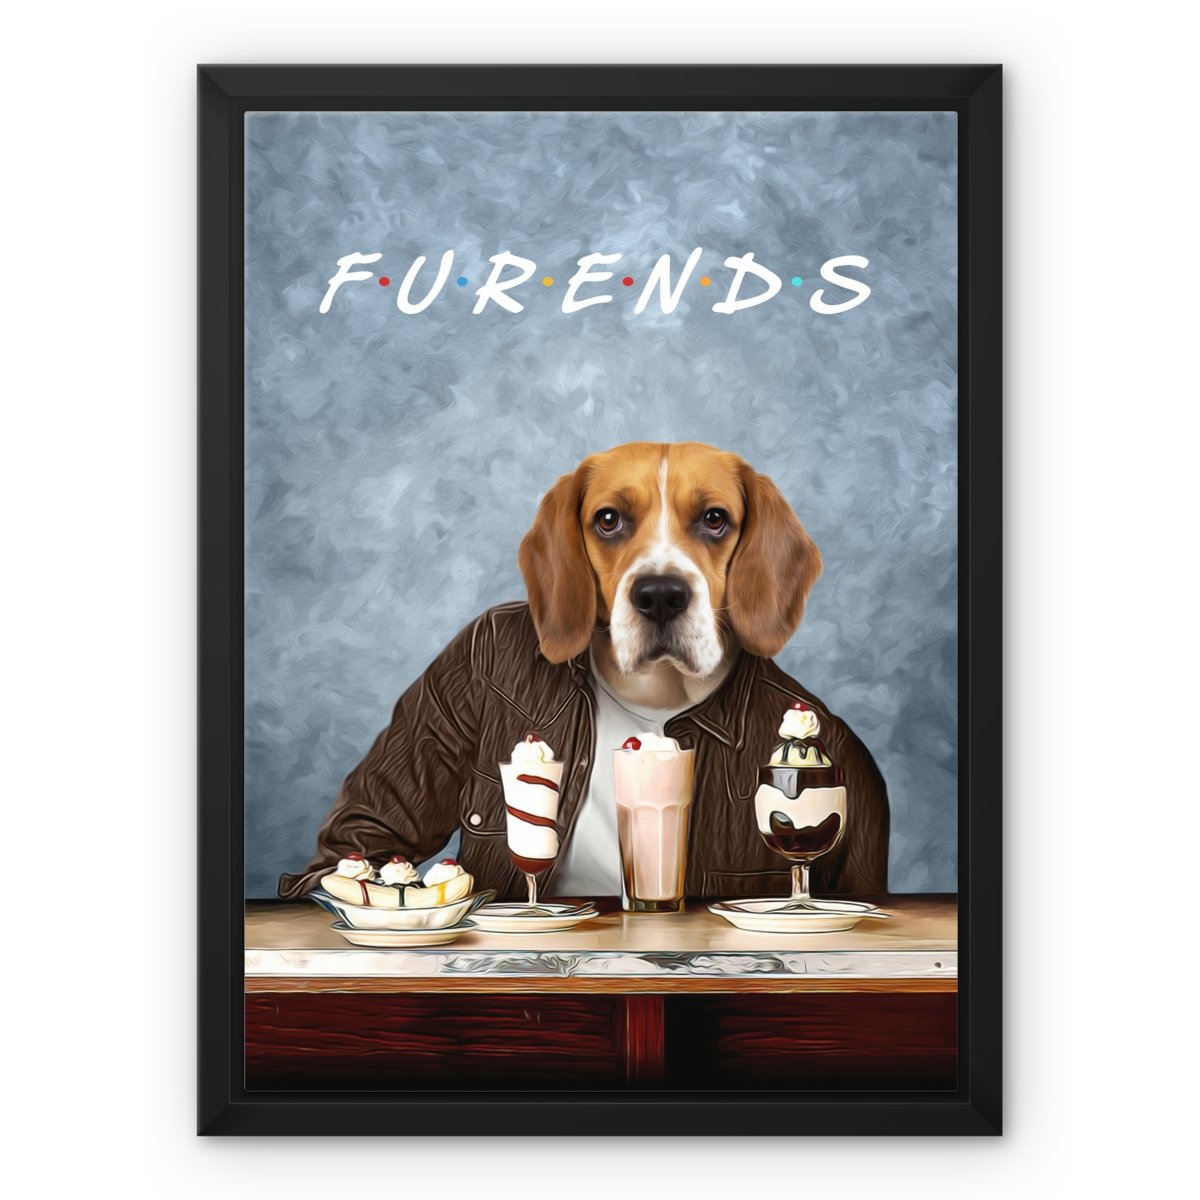 Furends: Custom Pet Portrait Canvas - Paw & Glory - #pet portraits# - #dog portraits# - #pet portraits uk#pawandglory, pet art canvas,personalized dog and owner canvas uk, dog canvas, pet photo to canvas, custom pet art canvas, canvas dog carrier